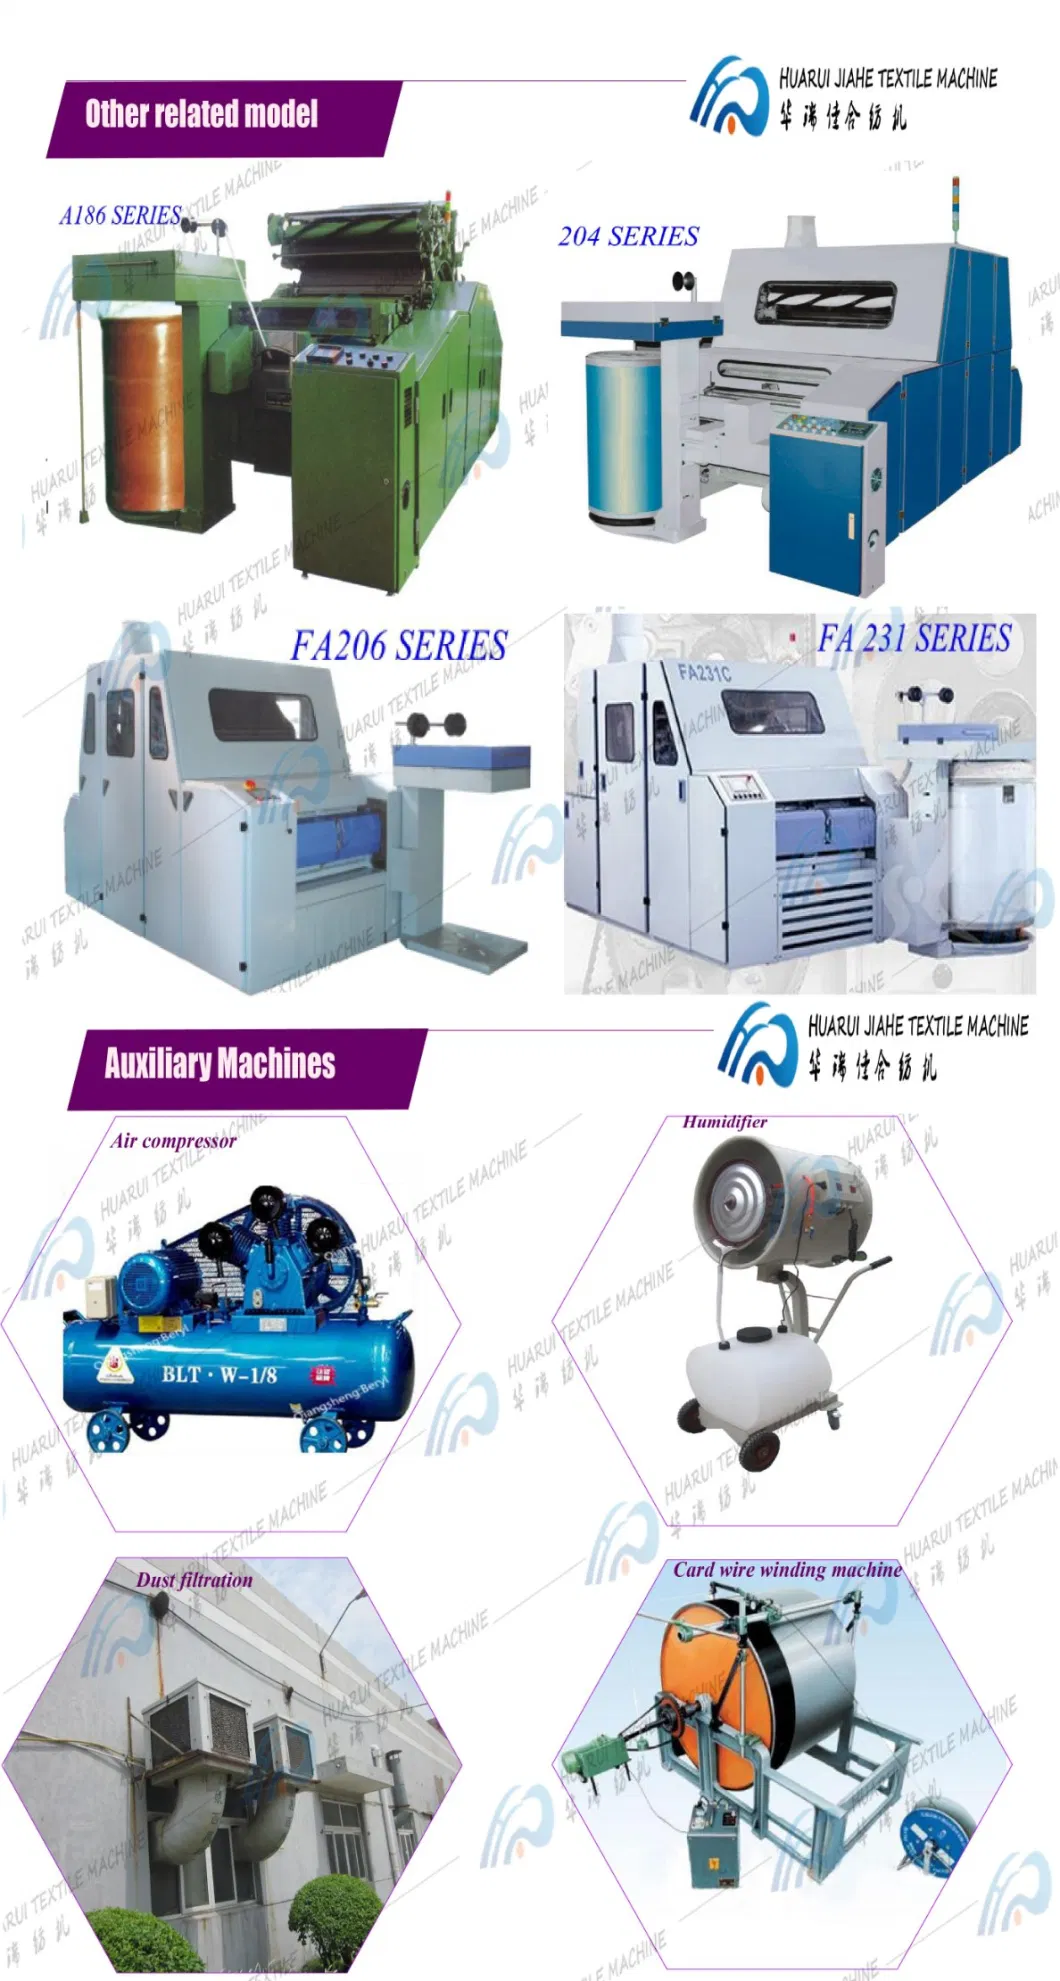 Supply Hank Yarn Segmented Dyeing Machine for Blended, Linen, Cotton, Polyester, Nylon, and Low-Elastic Yarns Dyeing